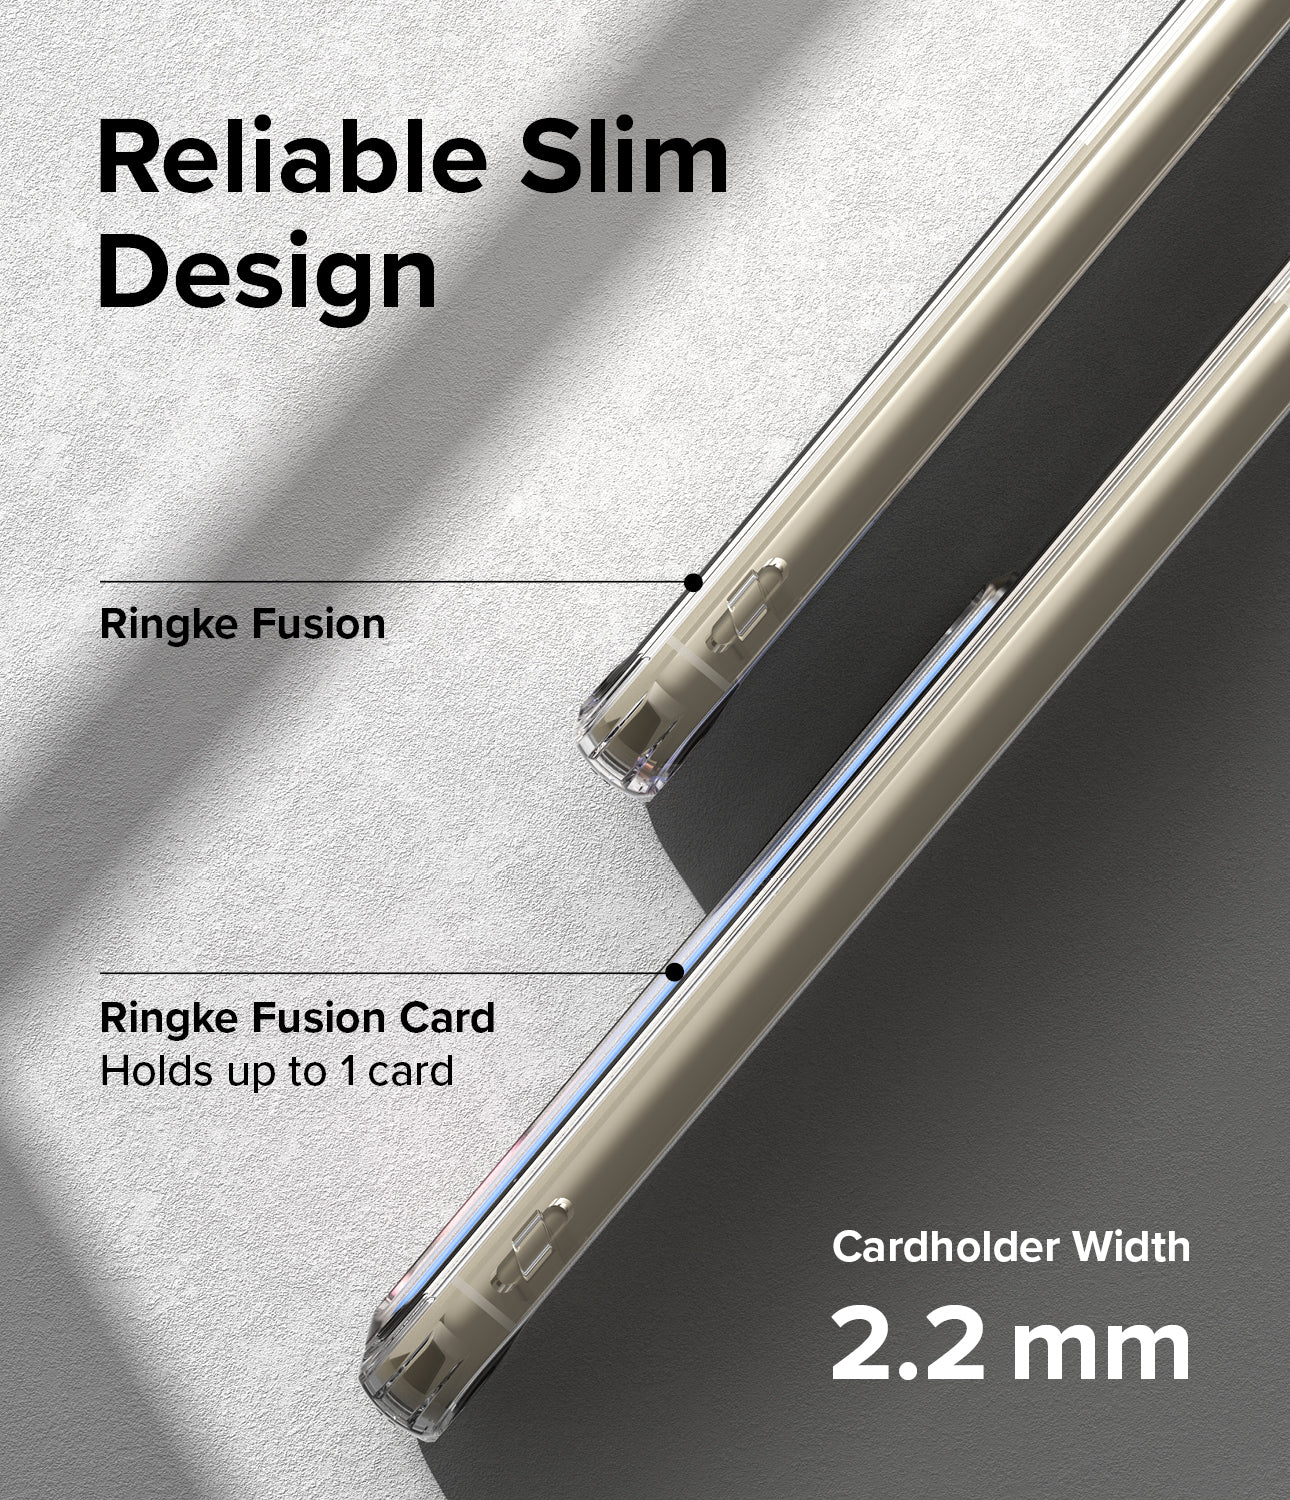 Reliable Slim Design l Ringke Fusion / Ringke Fusion Card Holds up to 1 card